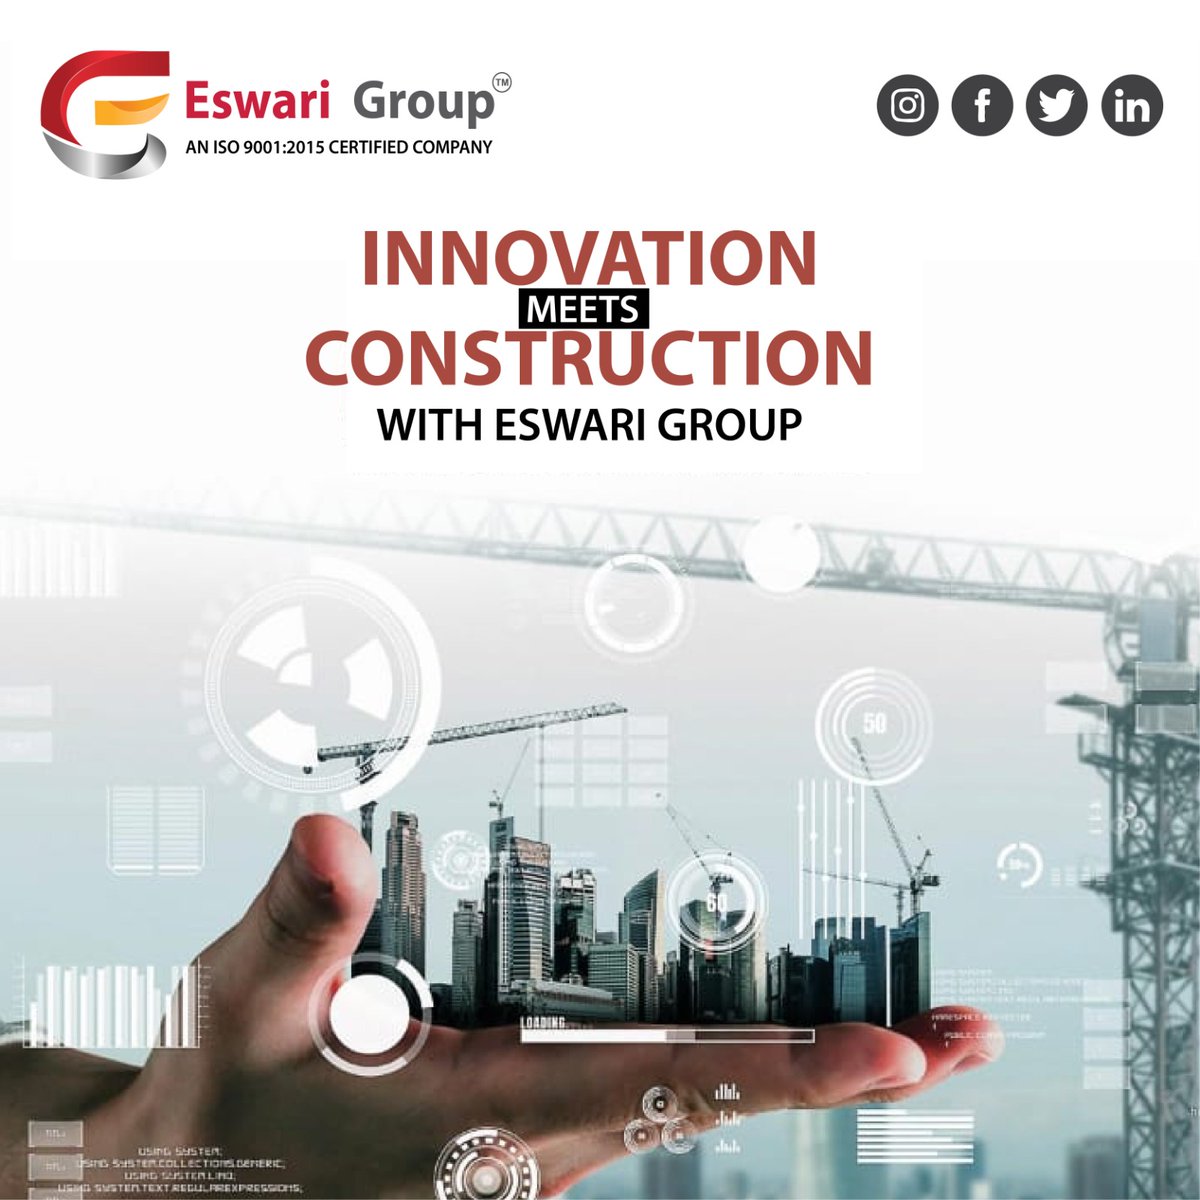 At Eswari Group, innovation meets construction excellence. Our cutting-edge approach combines advanced technologies with skilled craftsmanship to deliver innovative and sustainable solutions.
Phone: 9666696889
Website:eswarigroup.com
#Innovation #EswariGroup